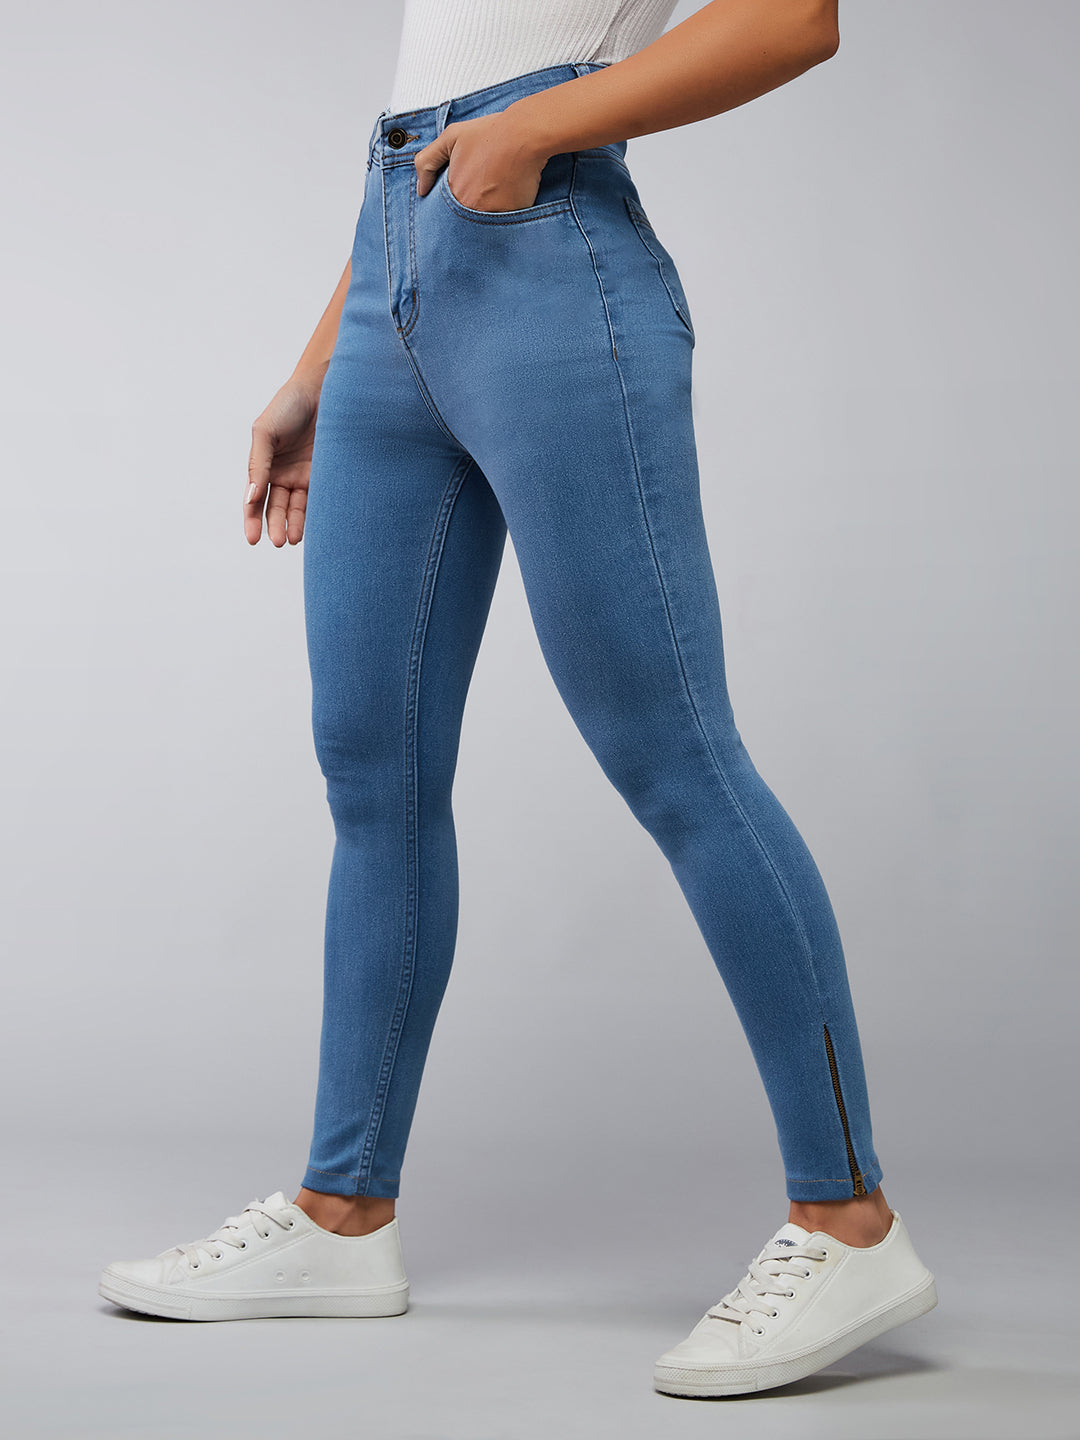 Women's Blue Skinny Fit High Rise Clean Look Cropped Stretchable Denim Jeans